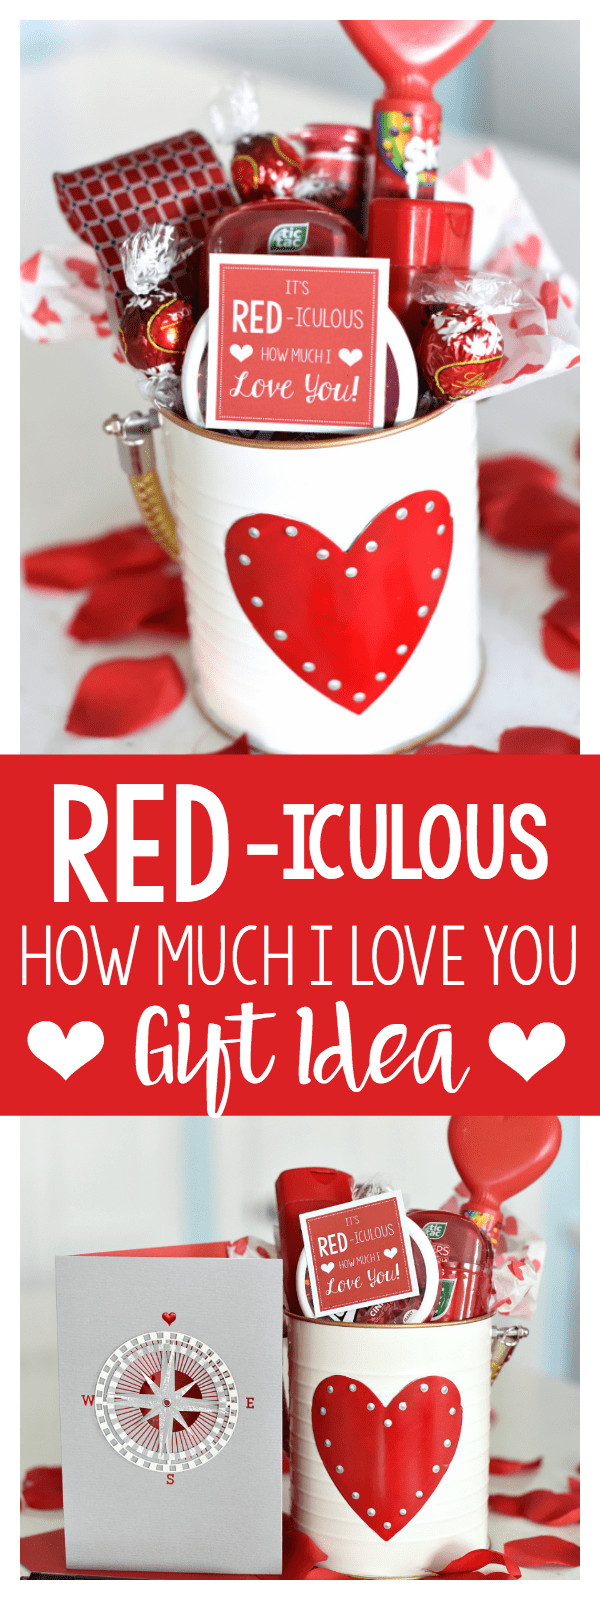 Funny Valentines Day Gifts
 Cute Valentine s Day Gift Idea RED iculous Basket